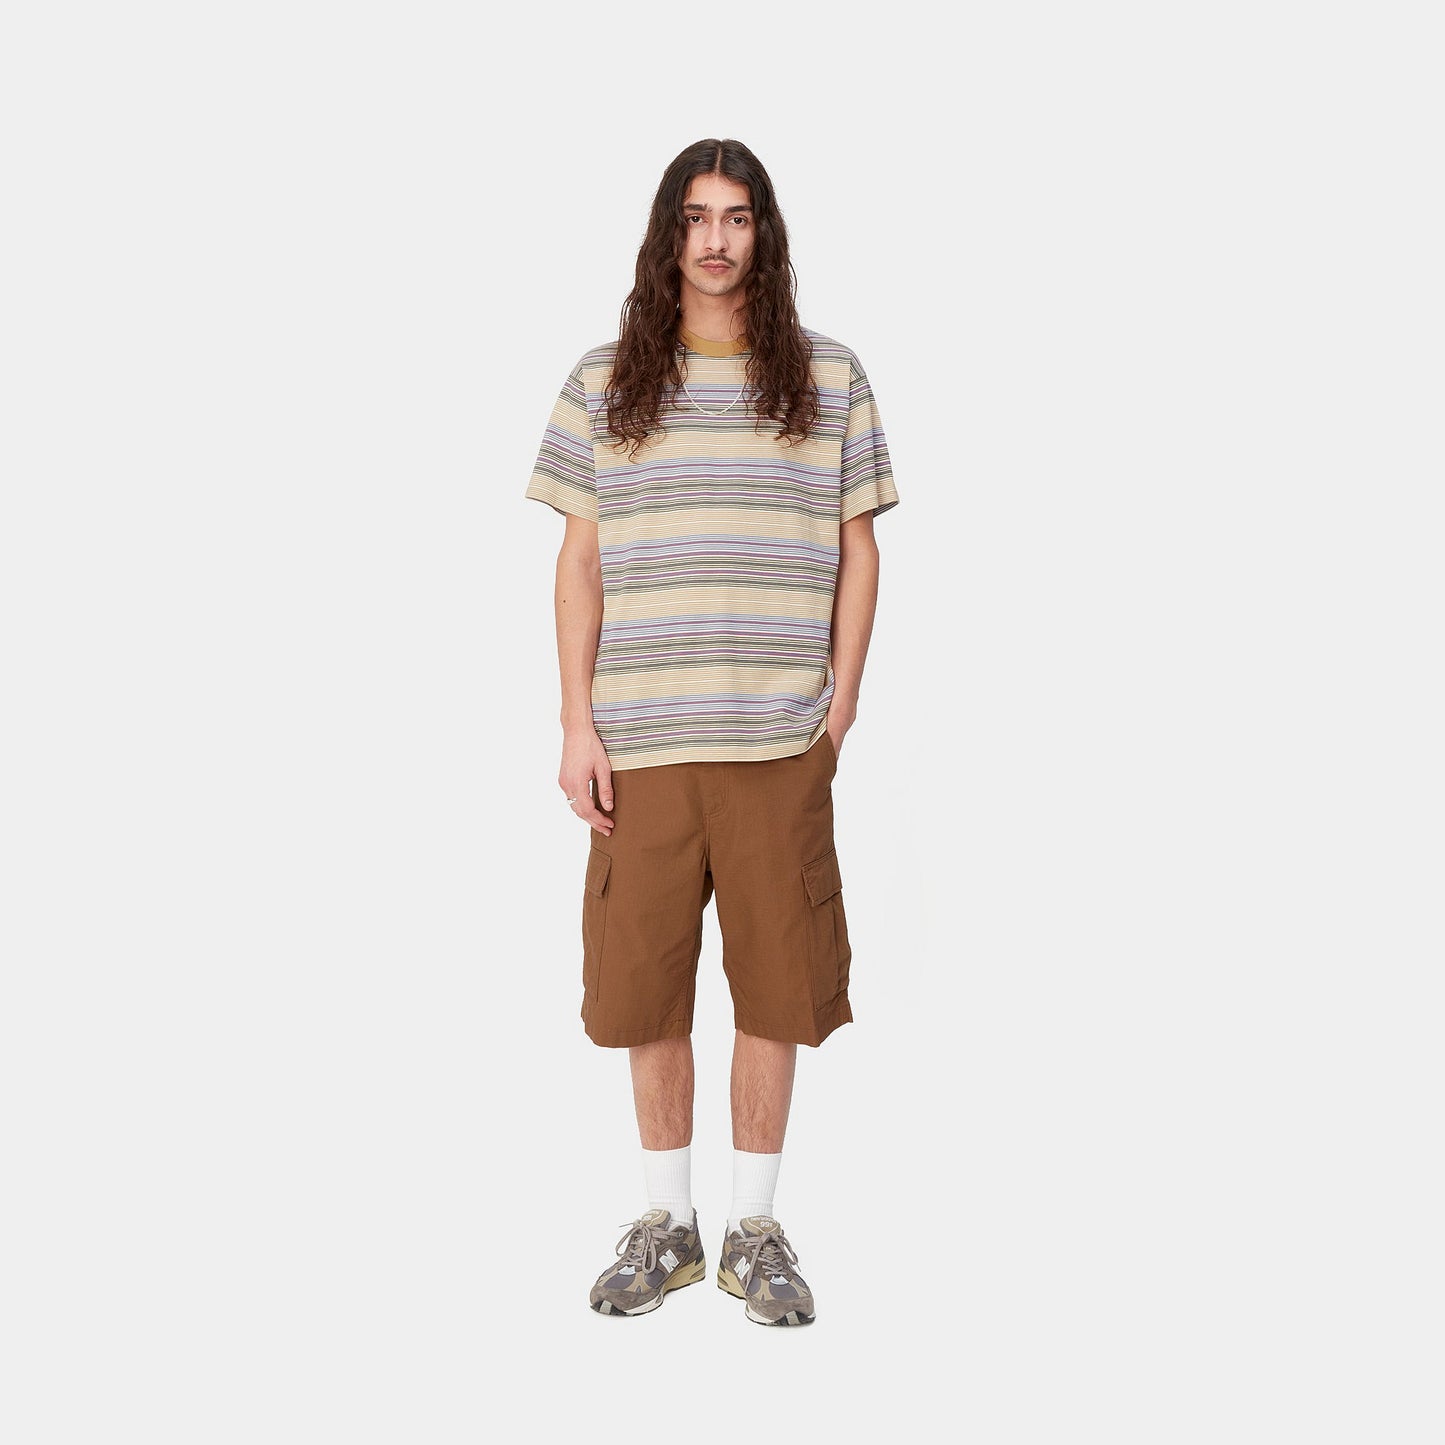 CARHARTT WIP S/S COBY T-Shirt - Colby Stripe Bourbon